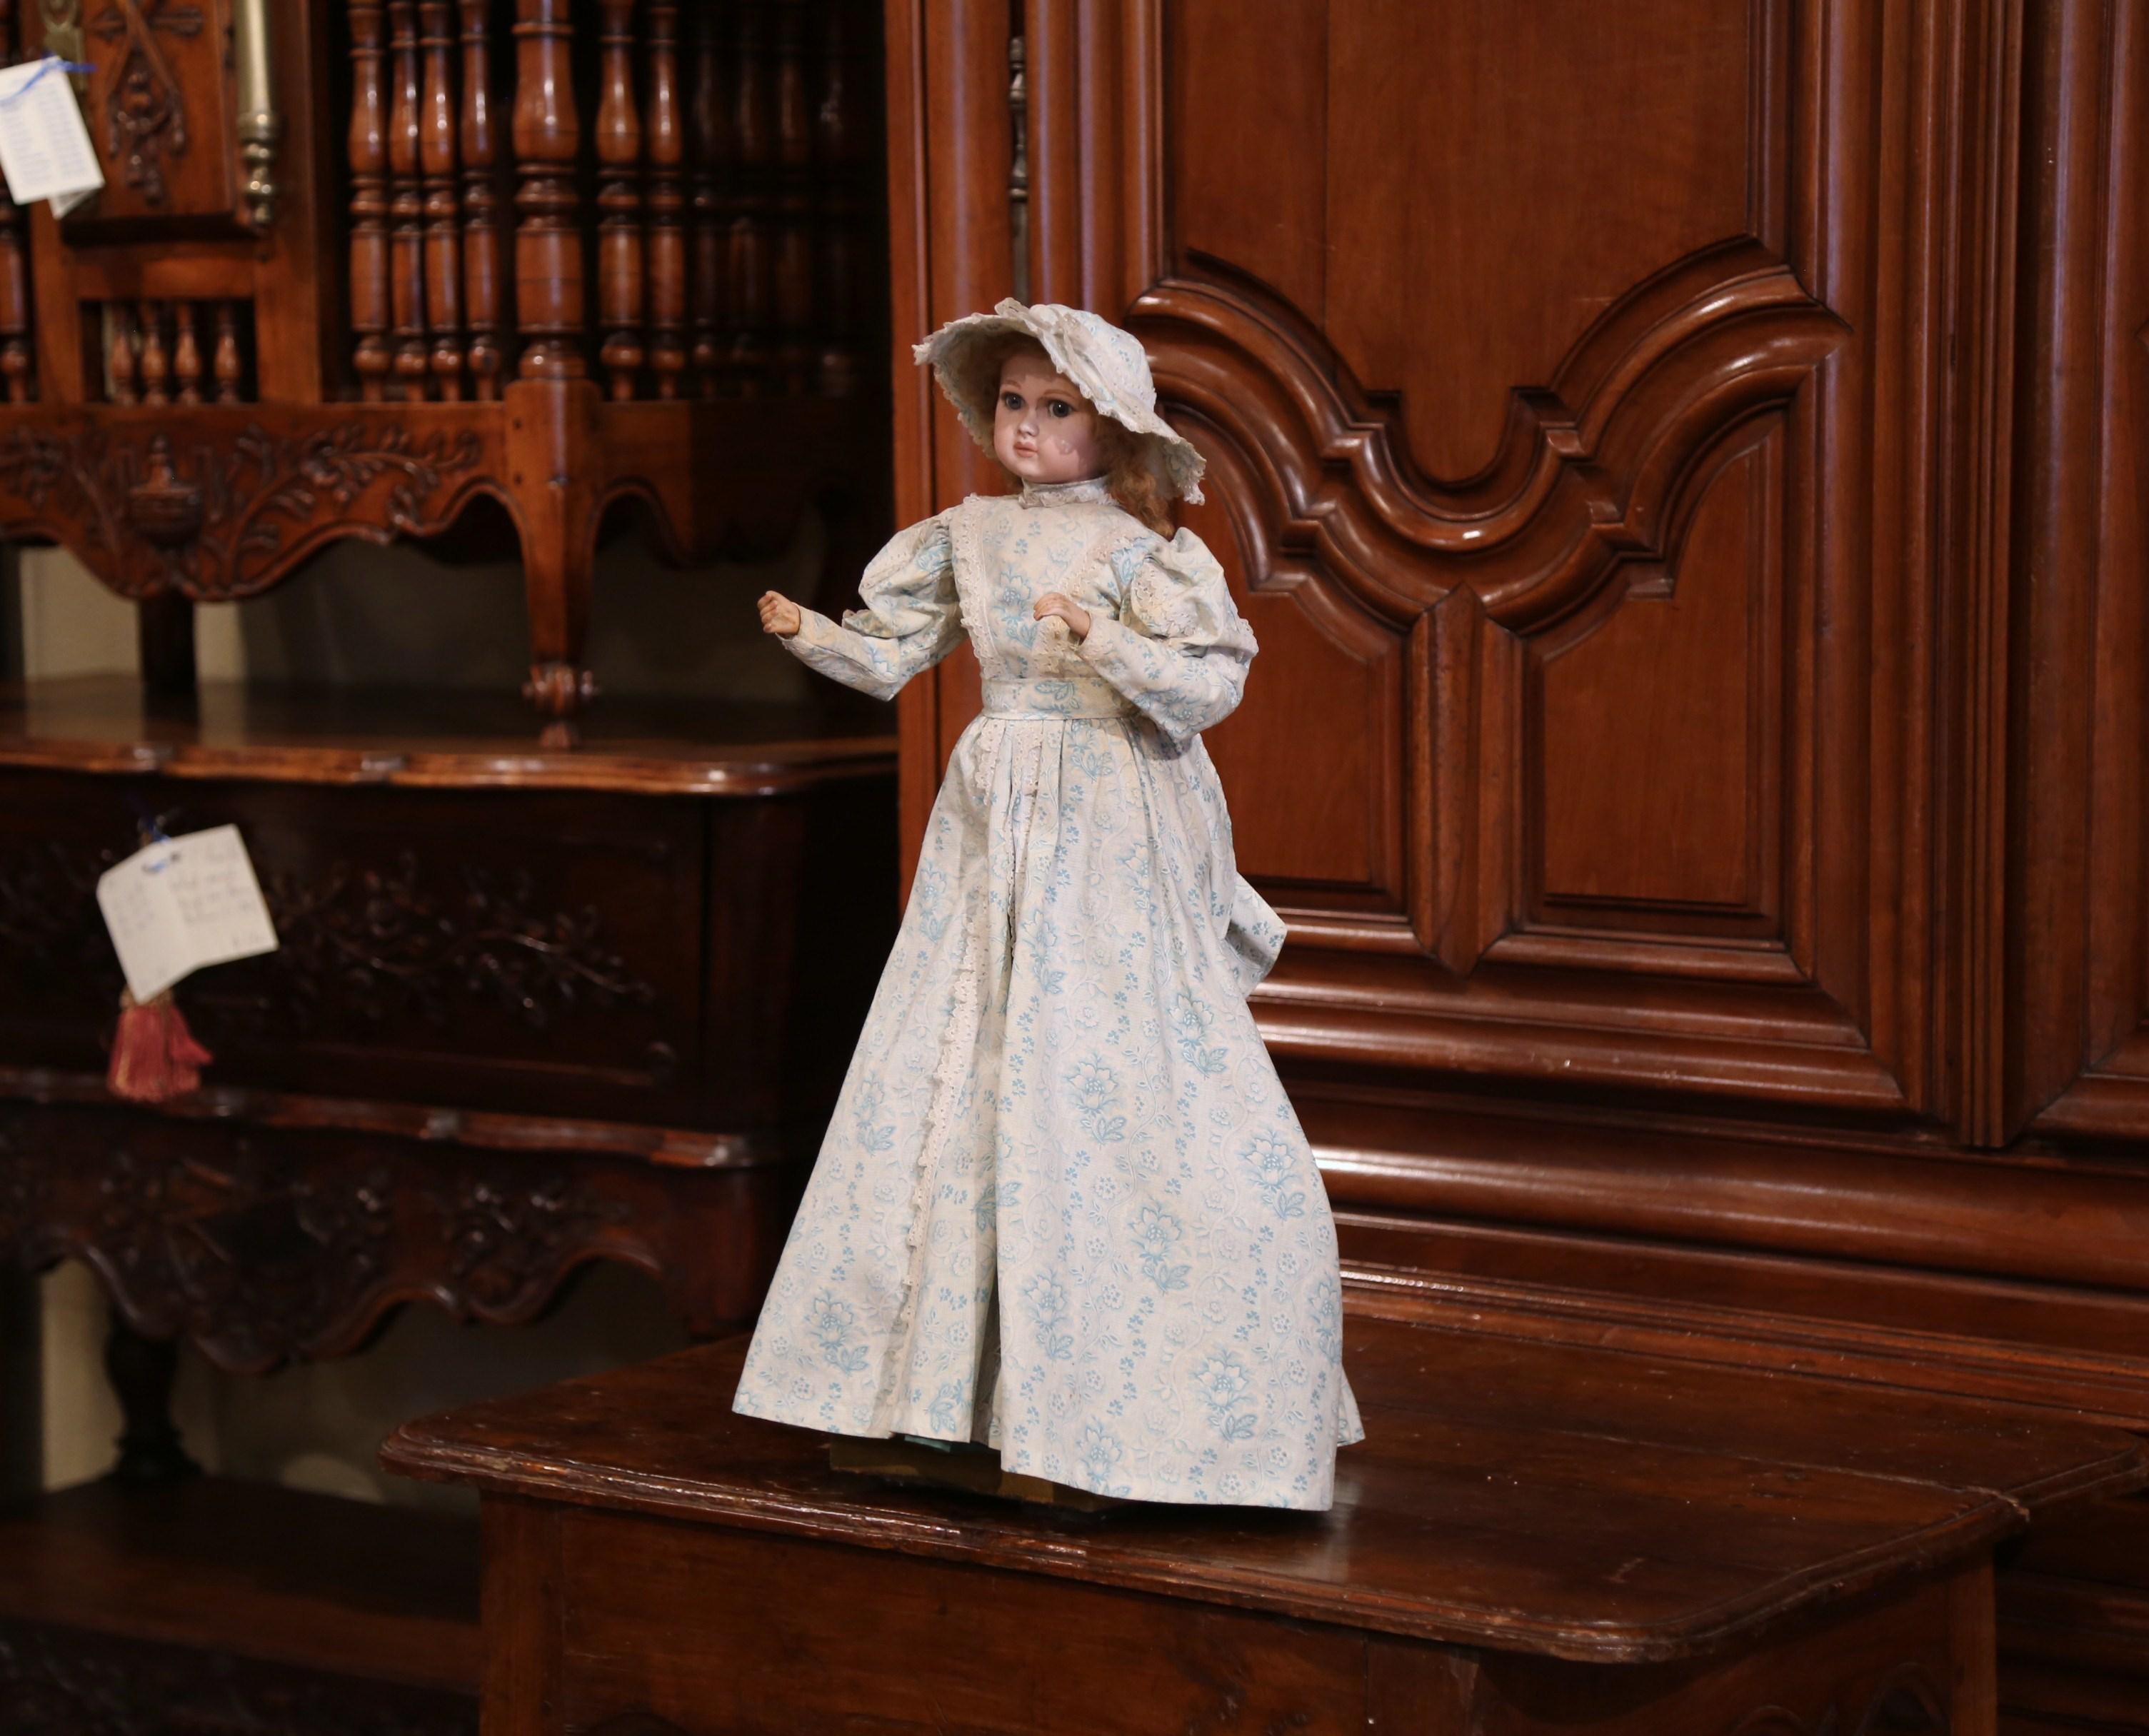 Here is a treasure for doll collector! This 19th century doll by Jumeau was crafted in France, circa 1870; the doll's head and right arm are in motion when the music is been played by cranking the knob on the base. The head and hands are made of